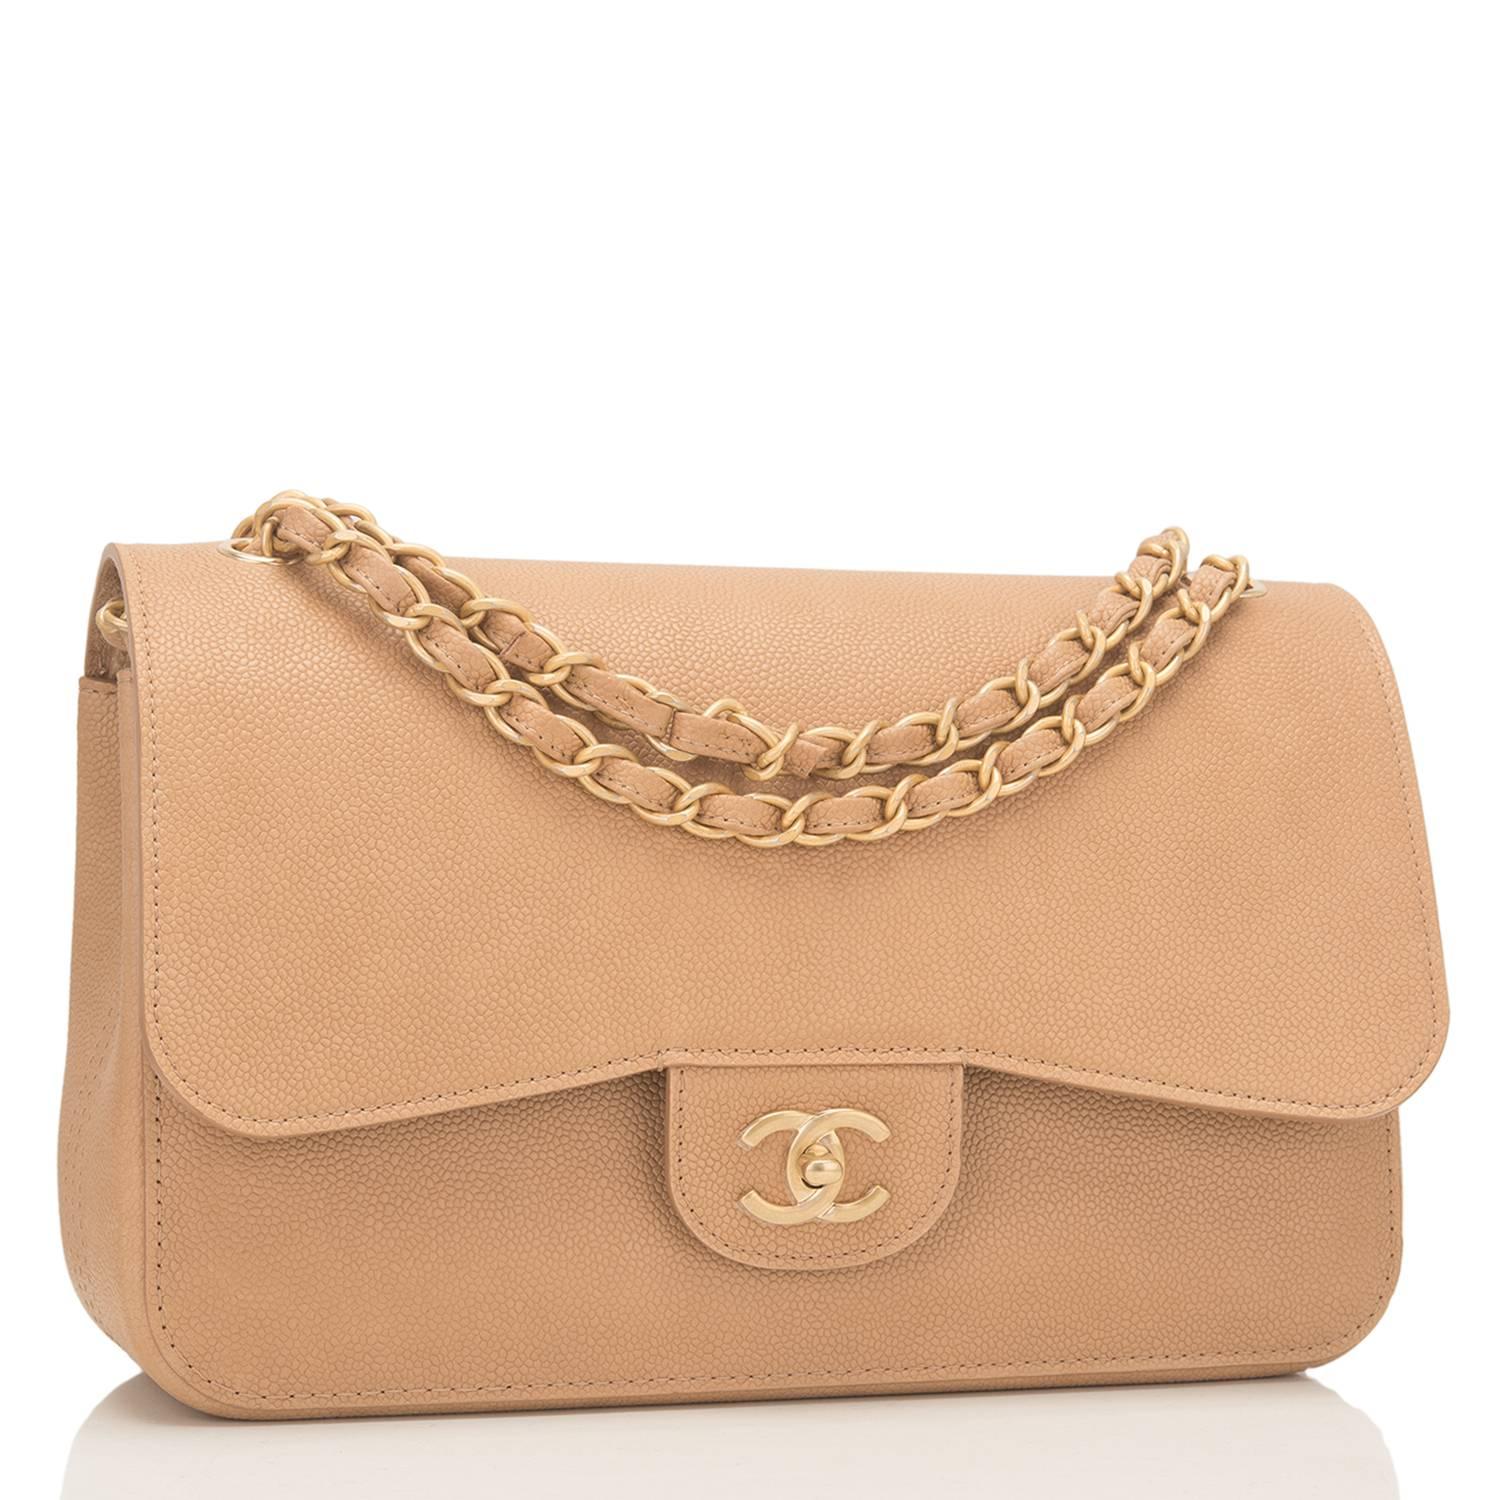 Chanel Jumbo Classic Double Flap bag of beige unquilted caviar (grained calfskin) leather and accented with gold tone hardware.

This bag features a front flap with signature CC turnlock closure, a half moon back pocket, and an adjustable interwoven